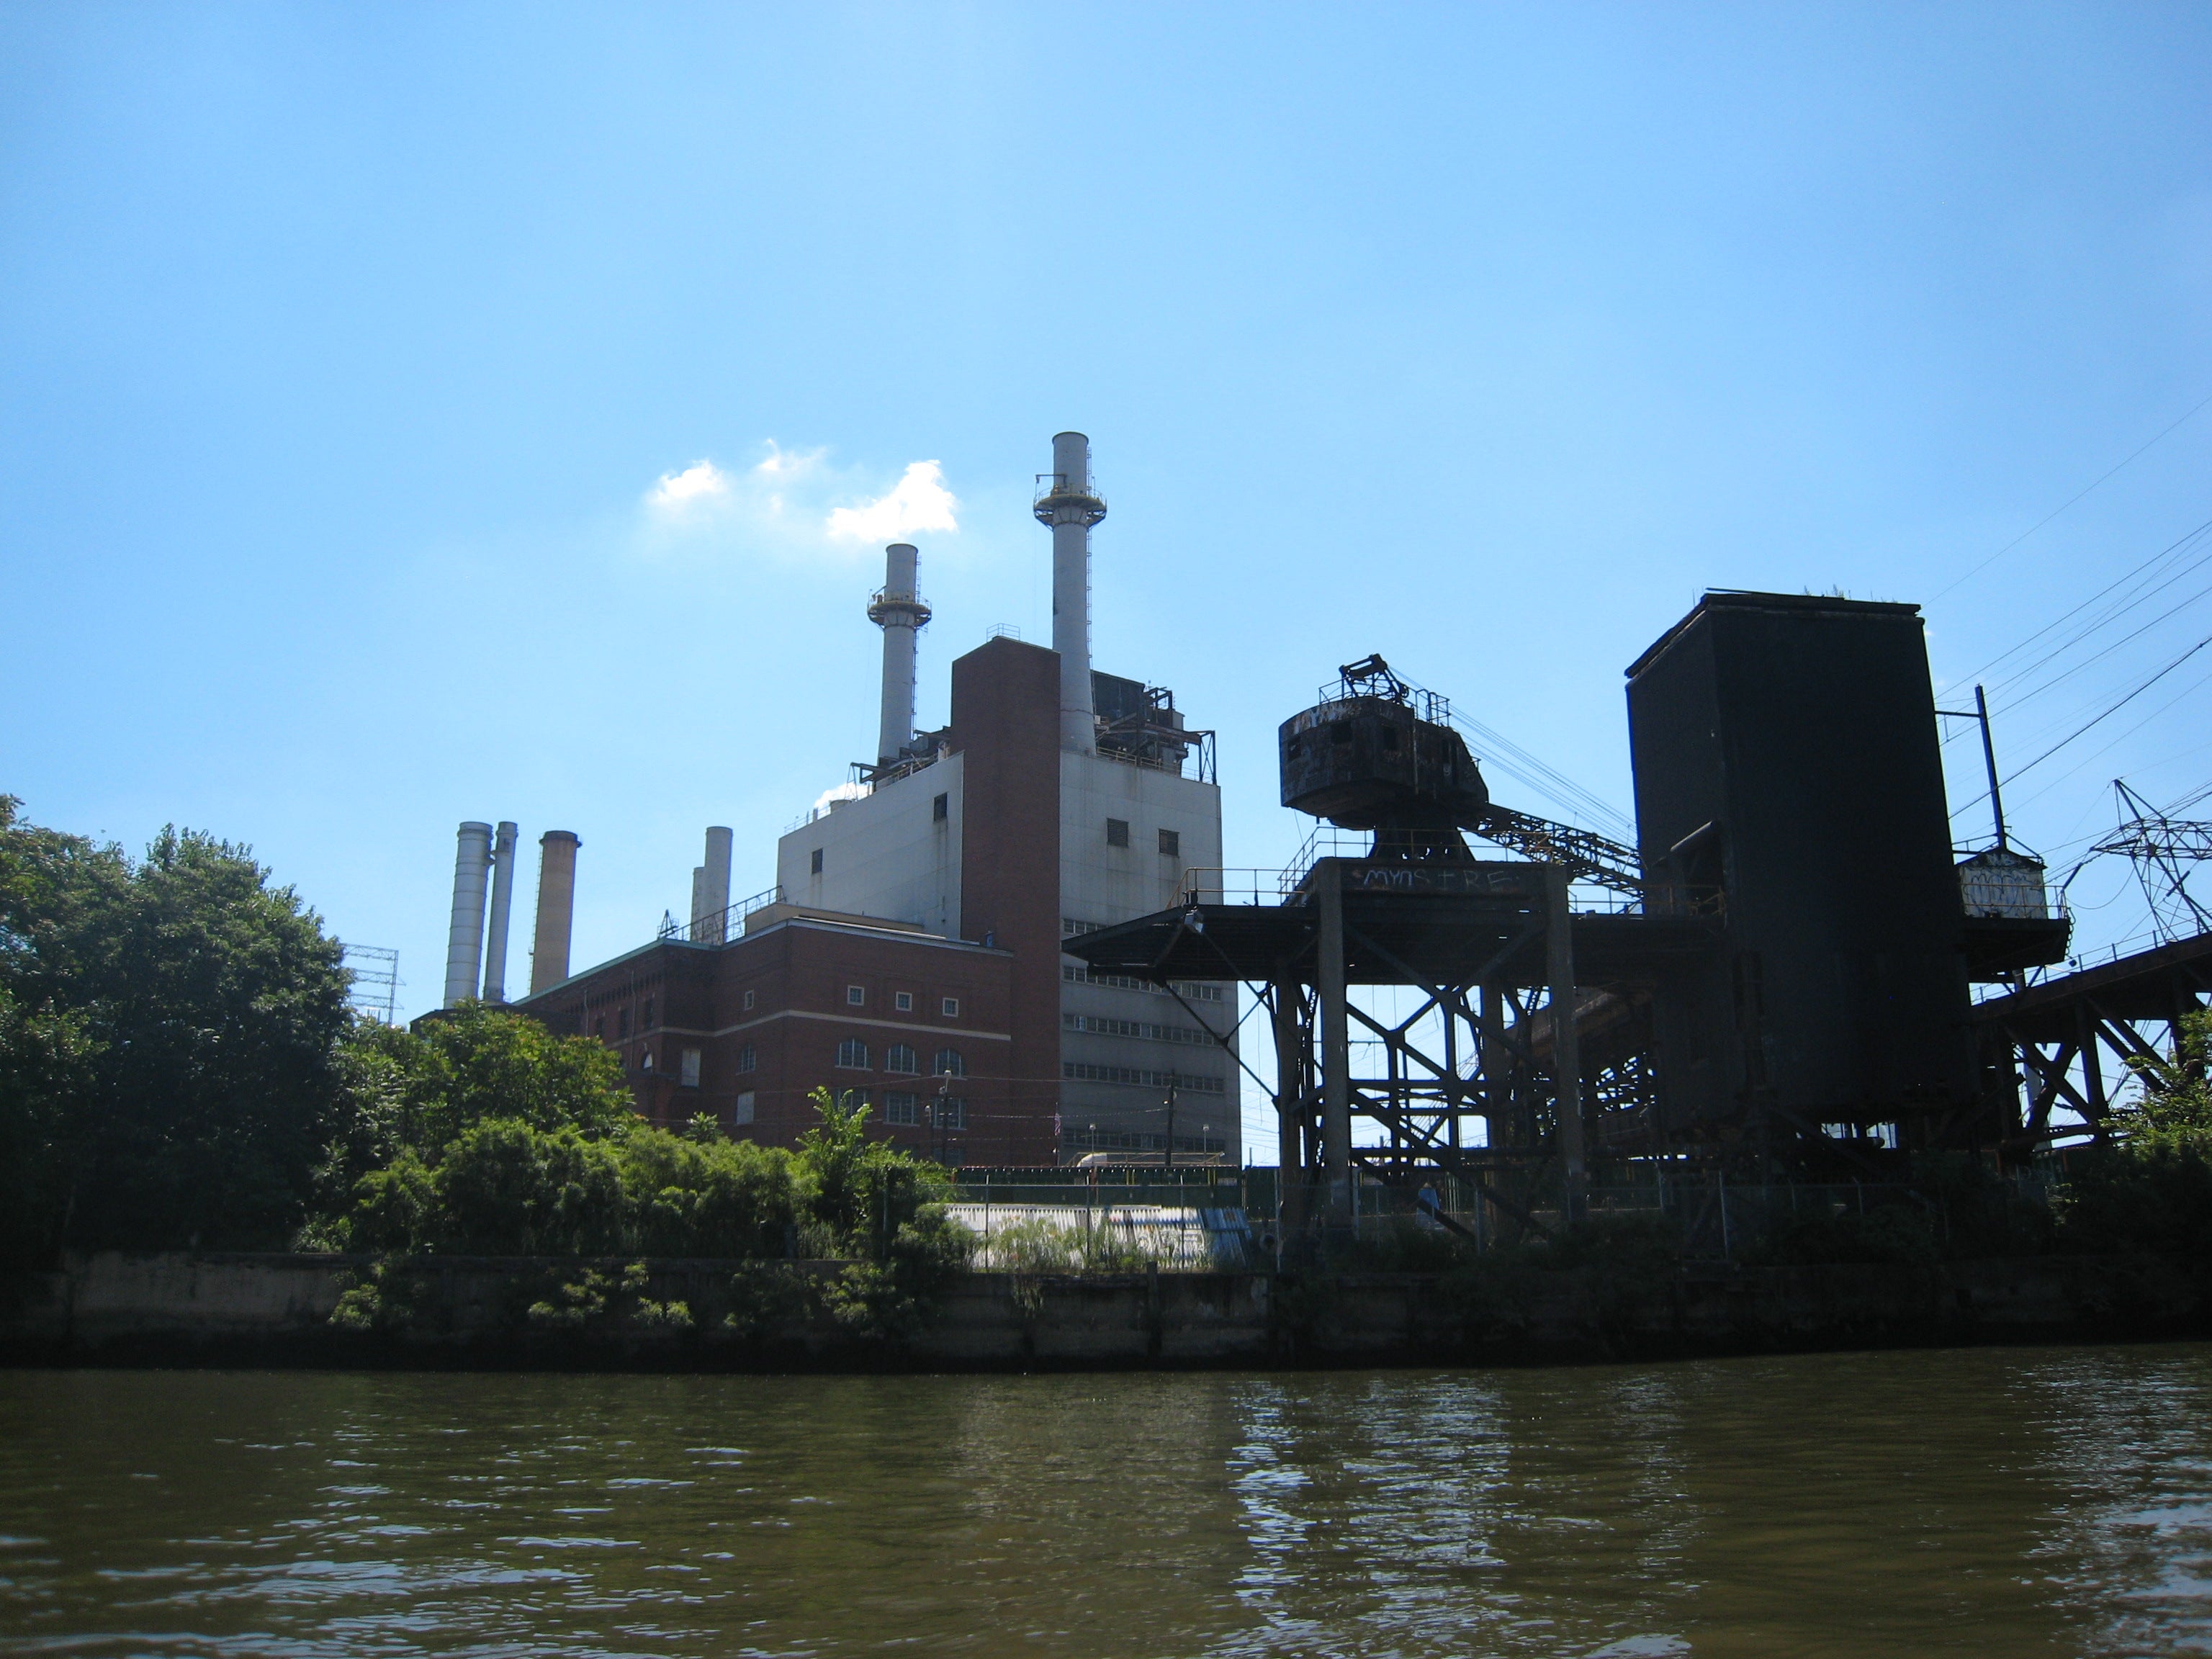 Veolia plant at Christian Street from the Schuylkill River